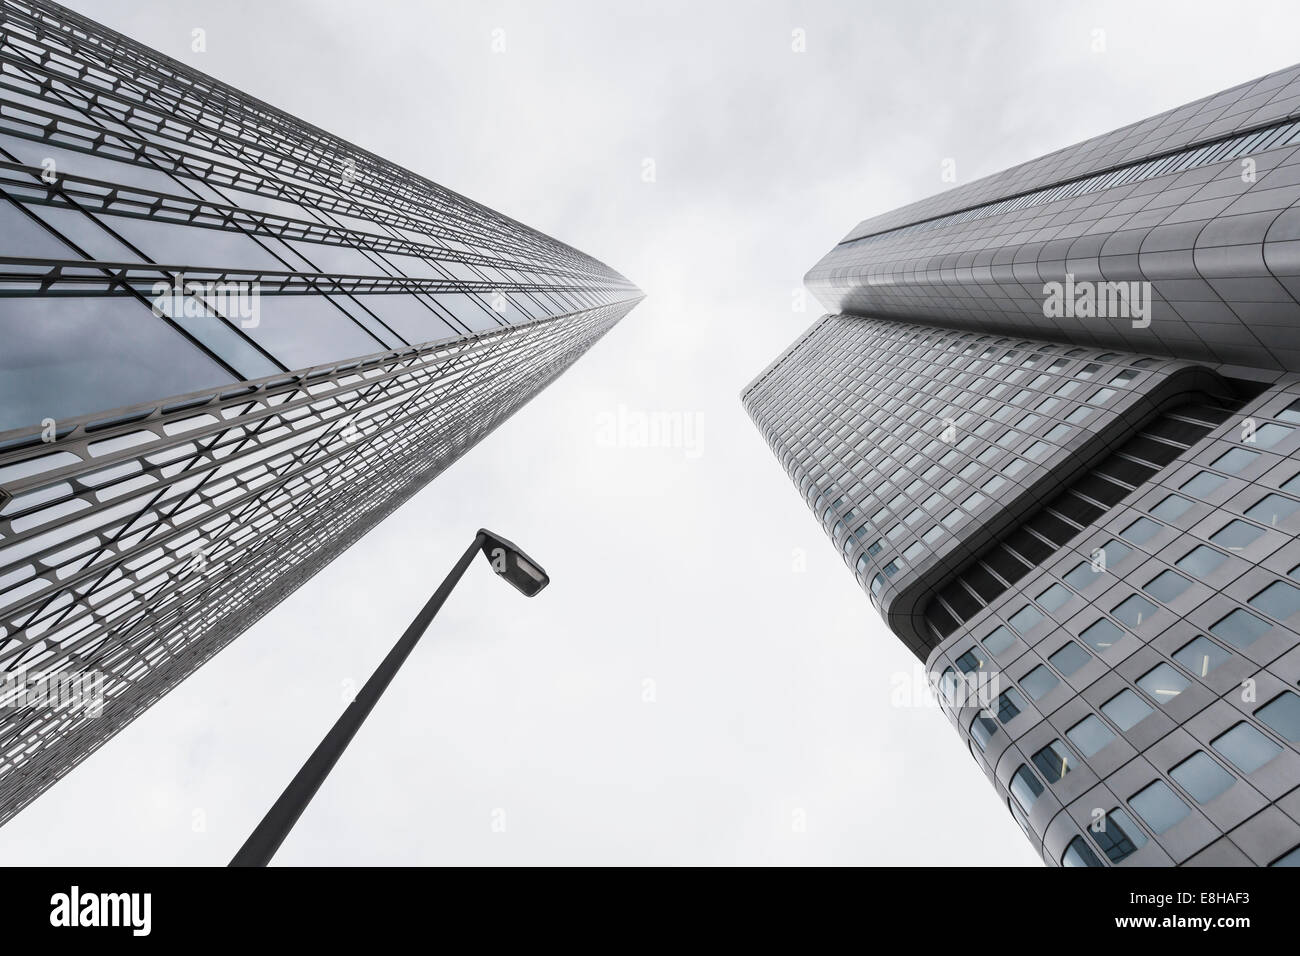 Germany, Hesse, Frankfurt, view to facades of modern office buildings Skyper and Silver Tower from below Stock Photo